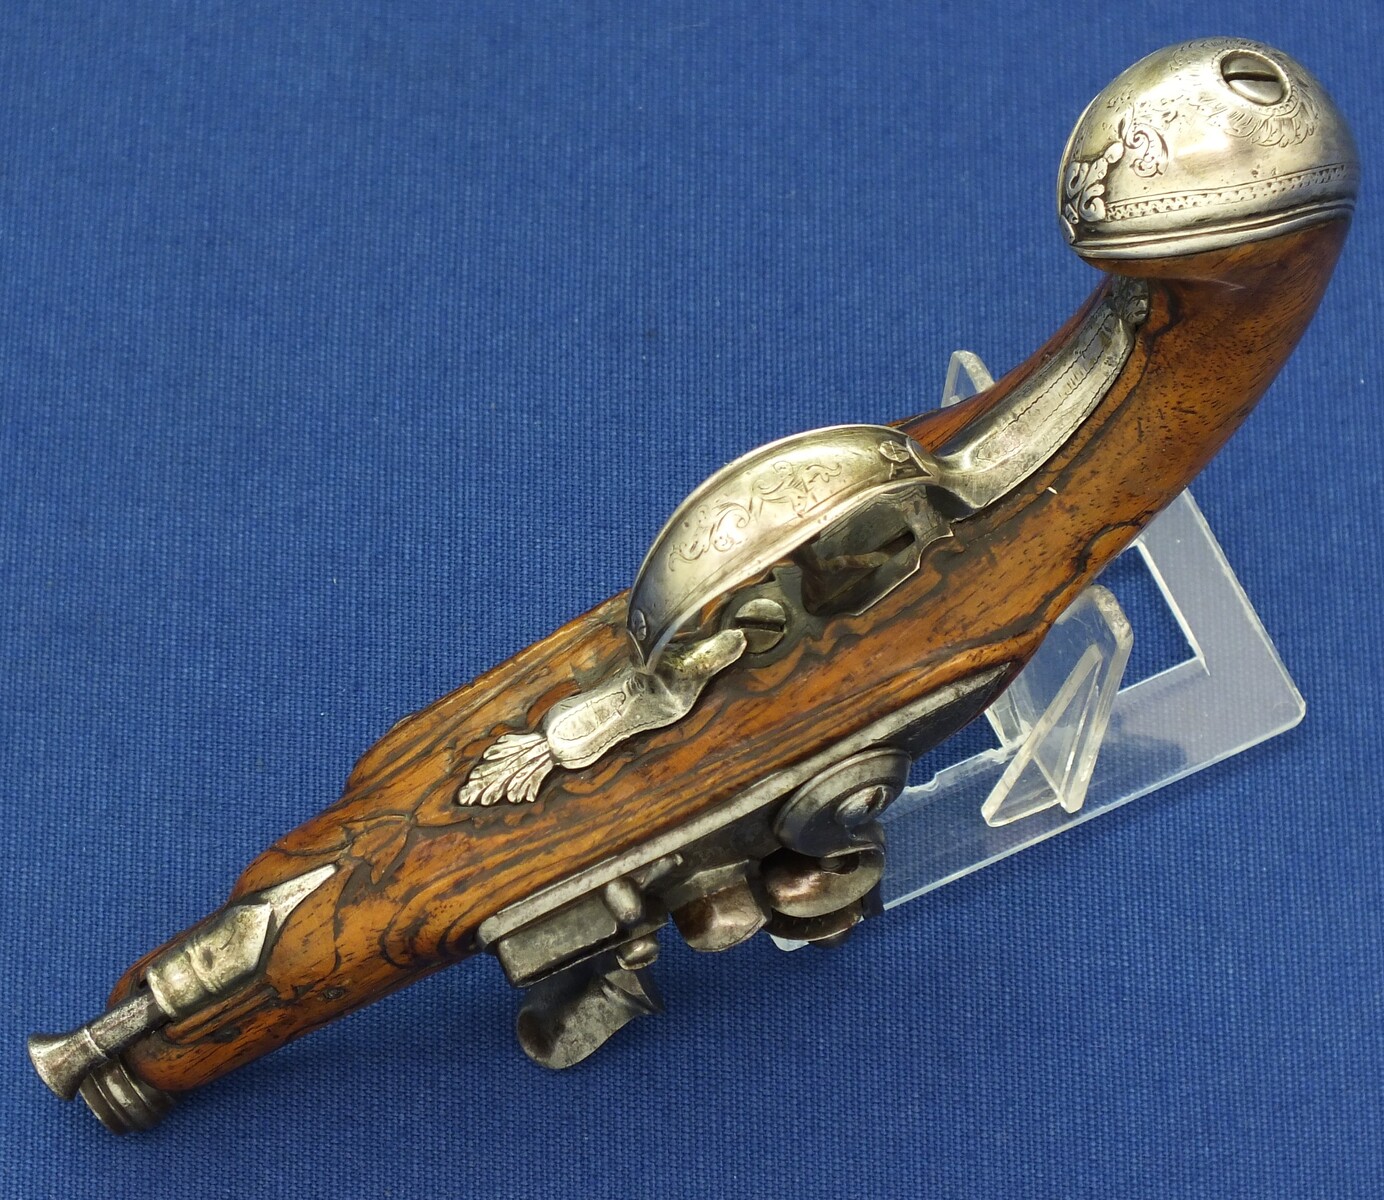 A fine antique 18th century French Silver mounted small Flintlock Pocket pistol circa 1760. Caliber 10mm rifled, length 18,5cm. In very good condition. Price 1.250 euro.